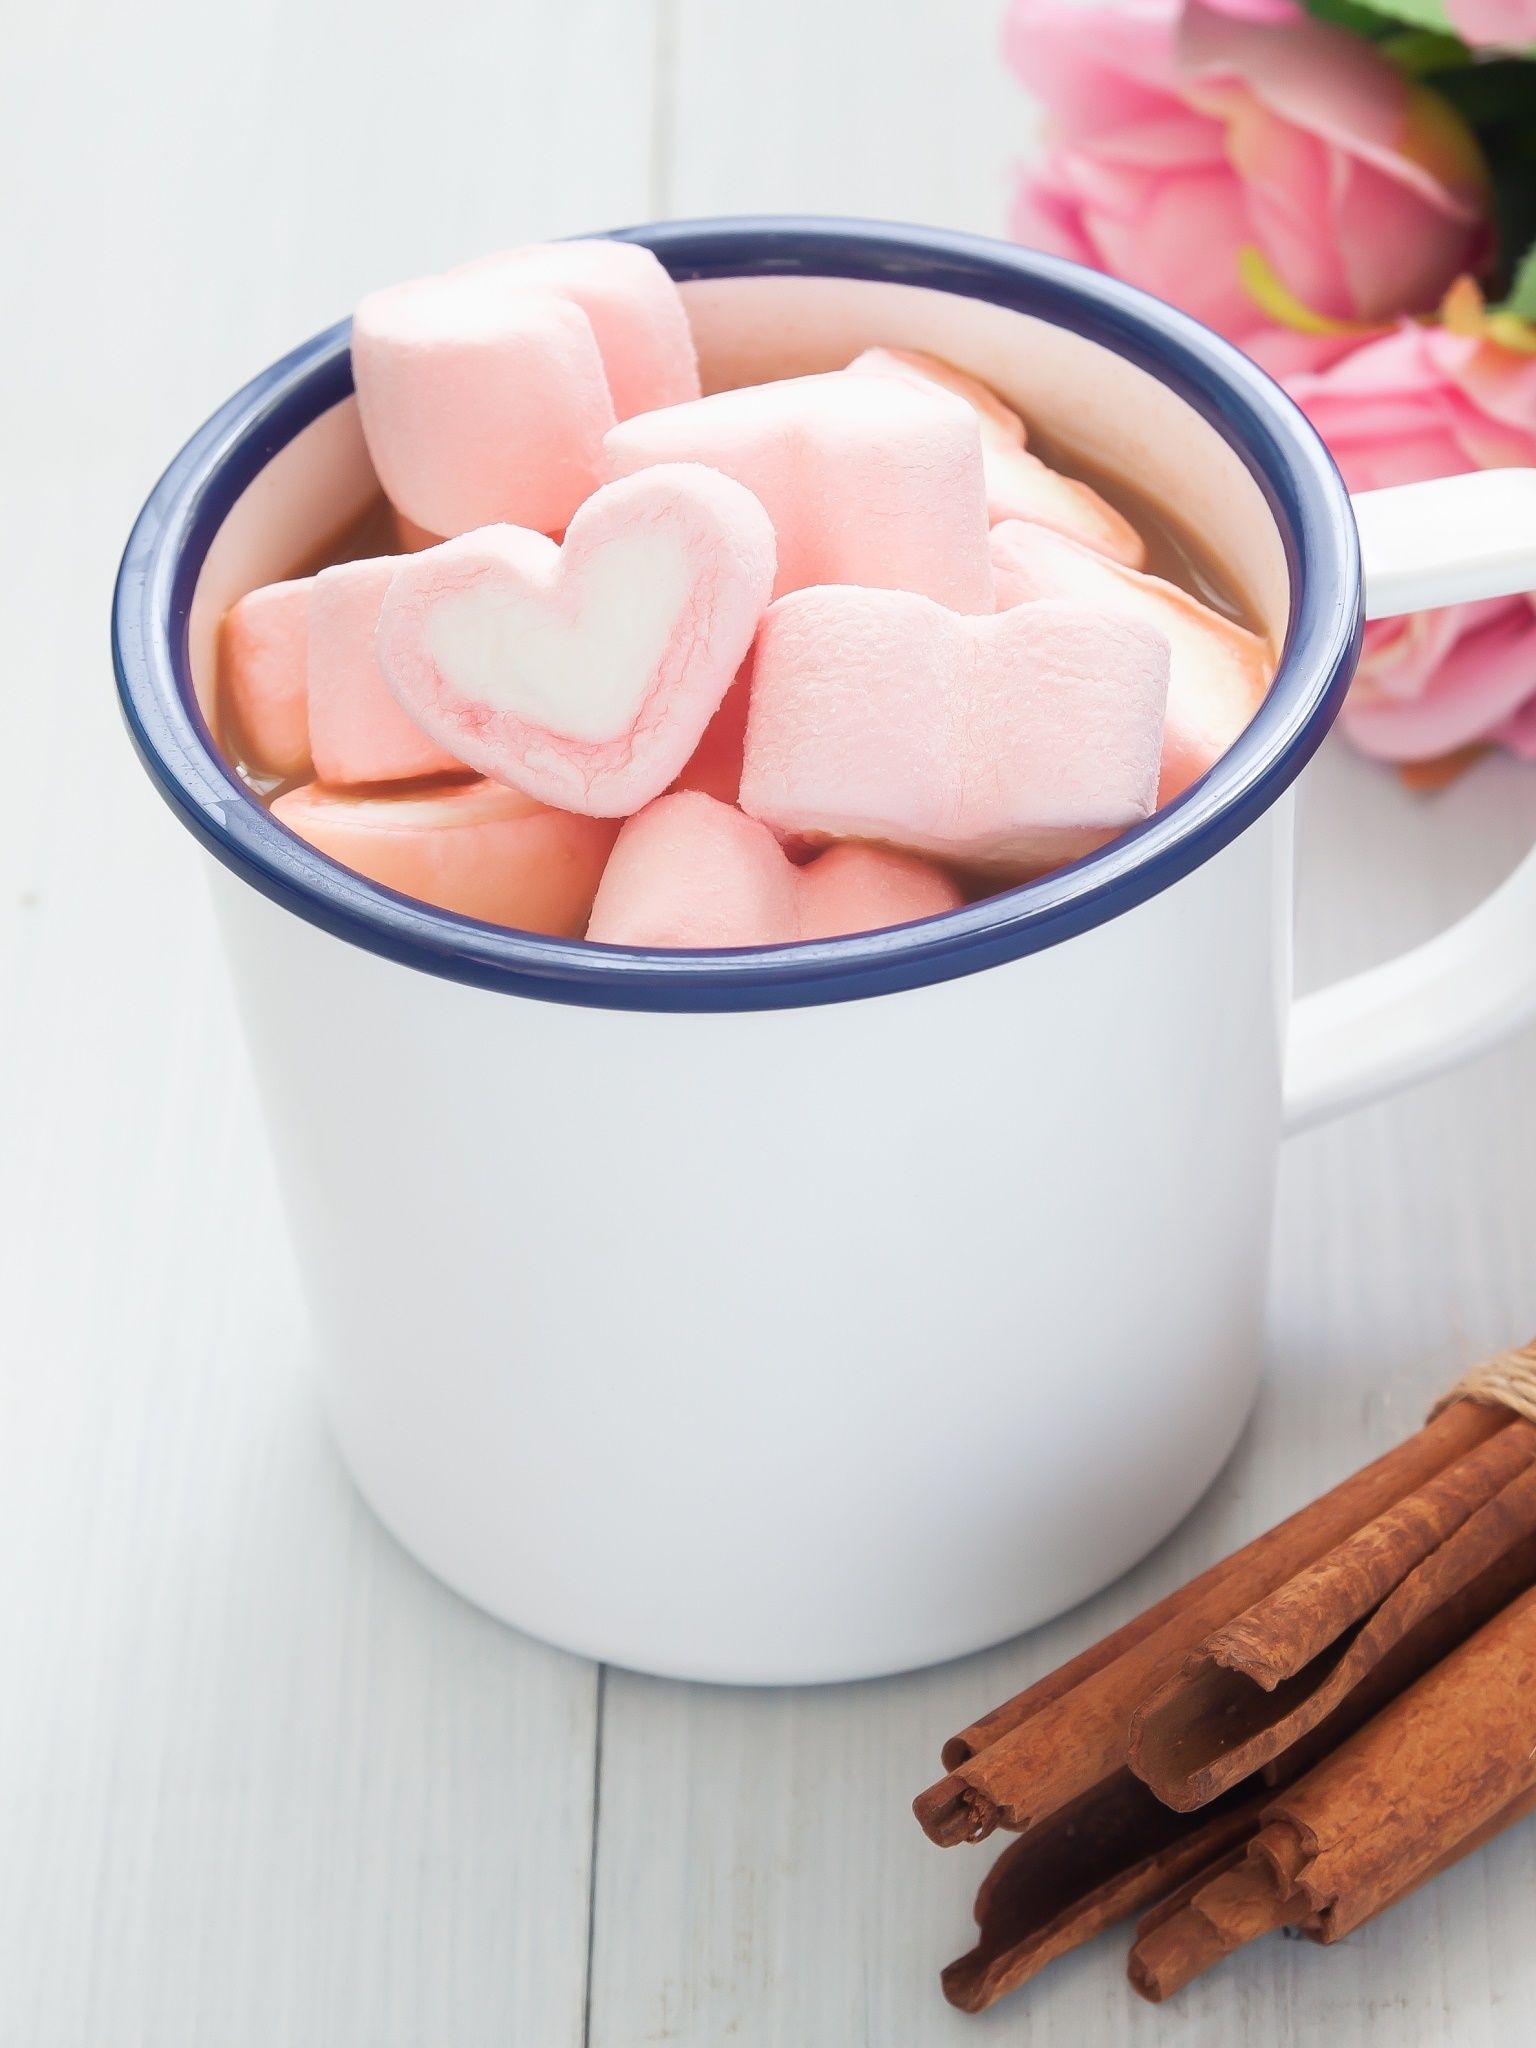 A cup of marshmallows and cinnamon sticks - Marshmallows